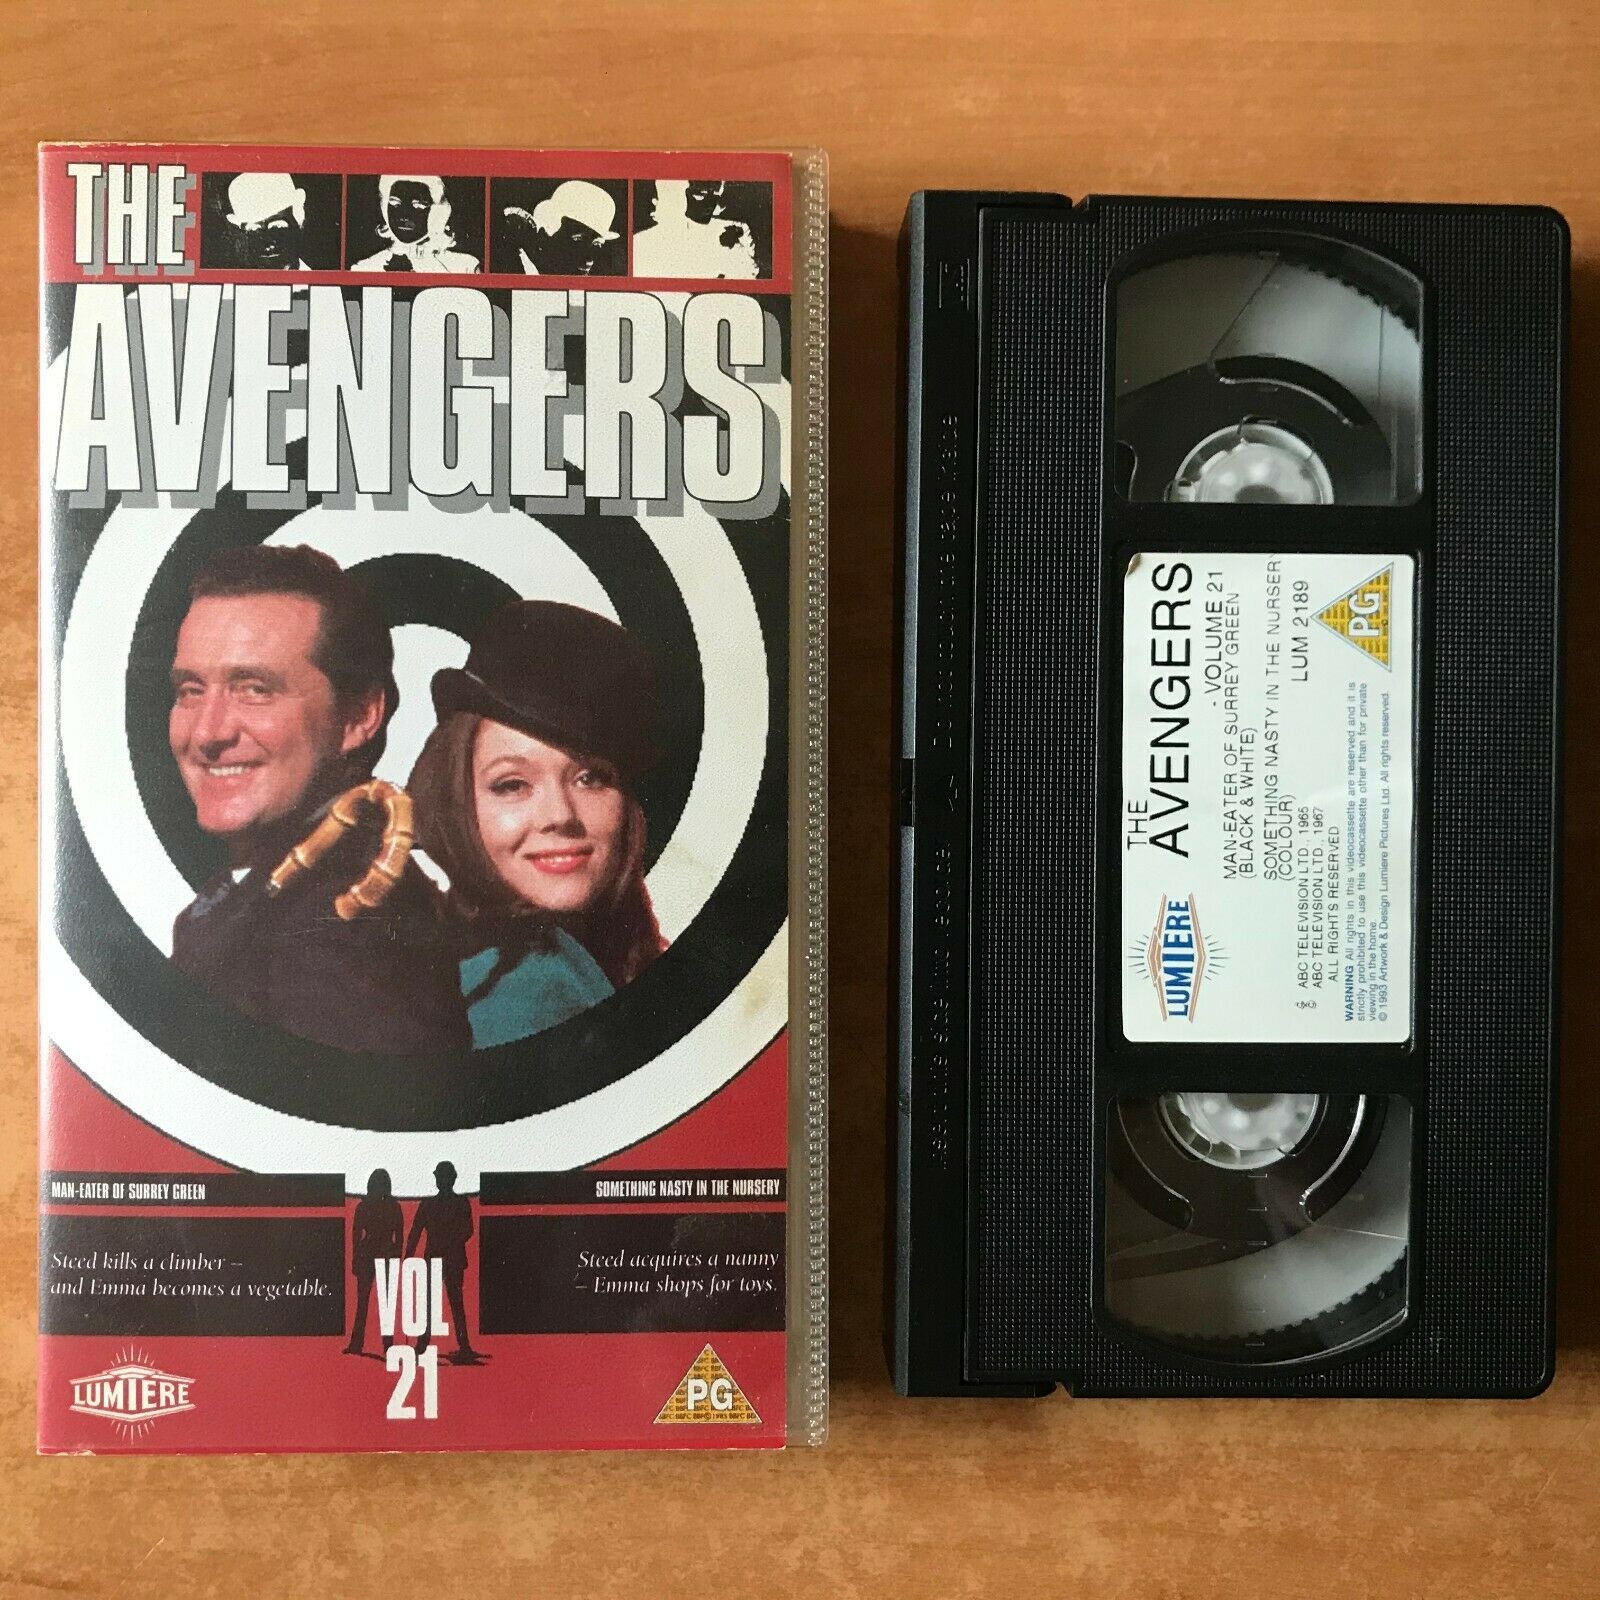 The Avengers (Vol. 21): Something Nasty In The Nursery - Action Series - Pal VHS-